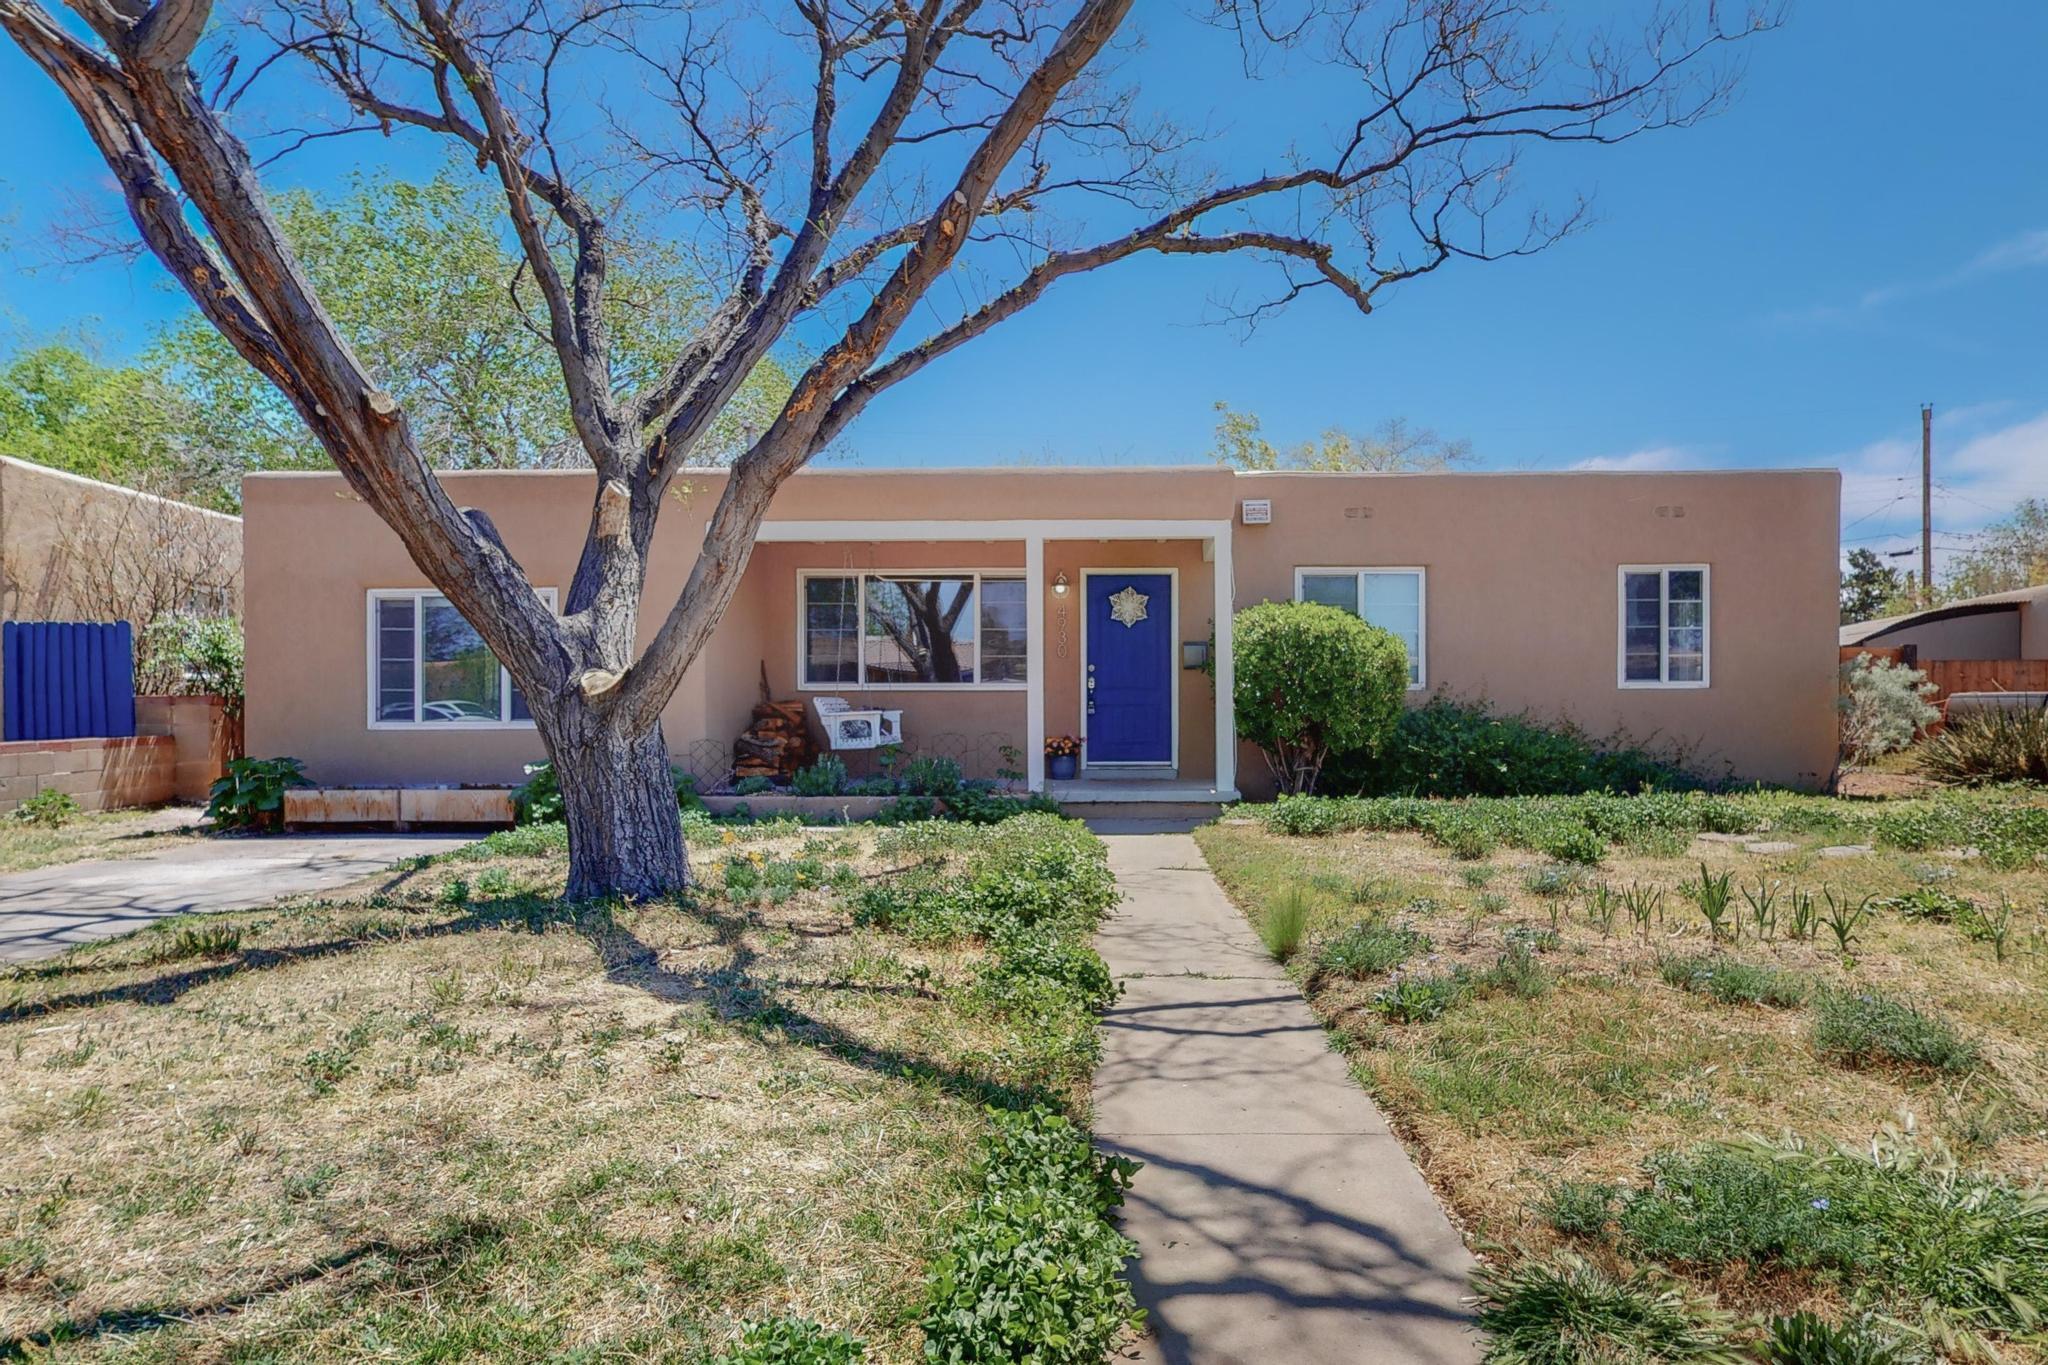 Welcome to this lovely S. UNM home! Inside you'll find hardwood, tile & laminate flooring, fresh paint, updated windows, curved archways, and plenty of room. Both bathrooms have been updated in the last 5 years. There are 2 living areas, 1 w/ a fireplace for cozy evenings, and 1 cold be used as an office. The owners used the large room in the back as their bedroom. Its also a  great space for a rec room, office, rental, or anything you imagine. Outside you'll find a  covered patio, large backyard and flowering locust, mimosa, & plums trees. Gate access on both sides leads you to the front yard where you'll find raised beds, amended garden soil and a lovely front porch complete with a swing. You might even find a carrot in the ground! Easy access to many places. Come see this one today!